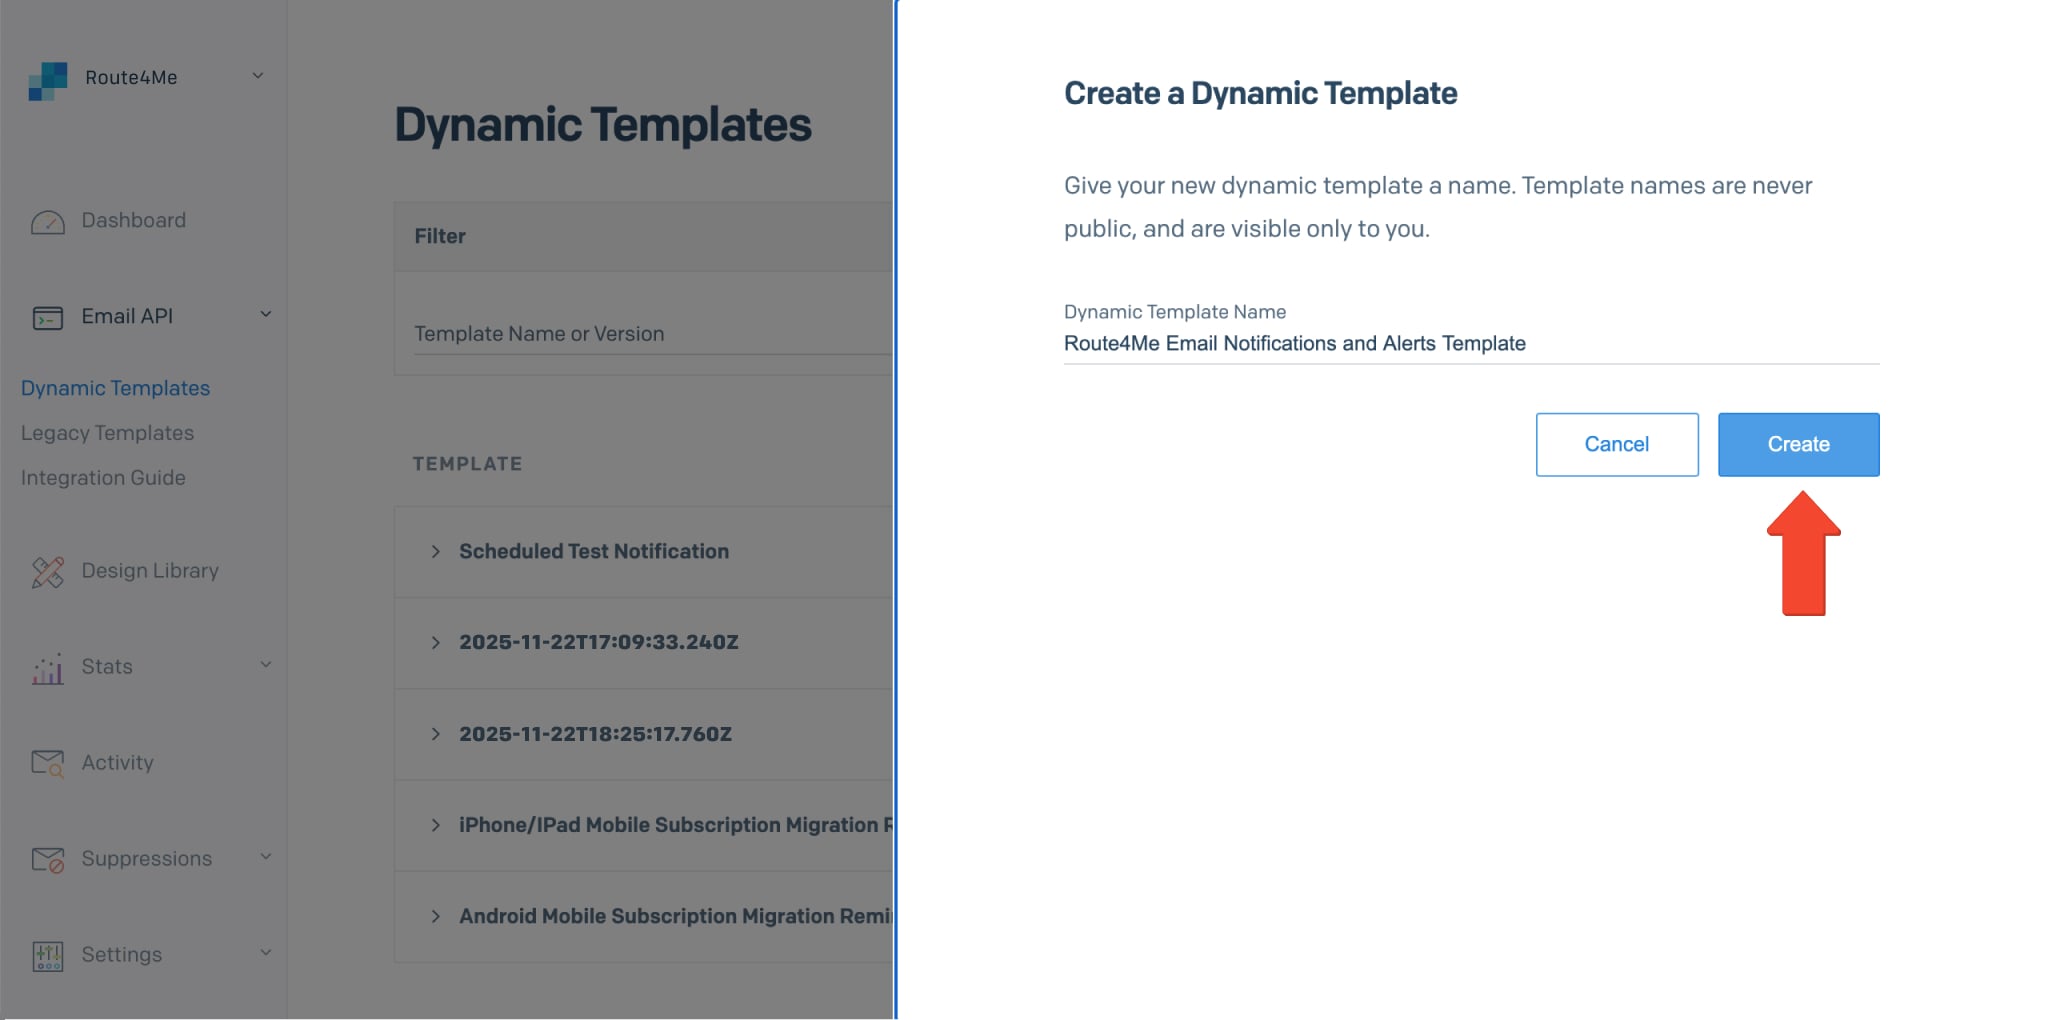 Name your Dynamic SendGrid Email Template and then proceed to create a new template.